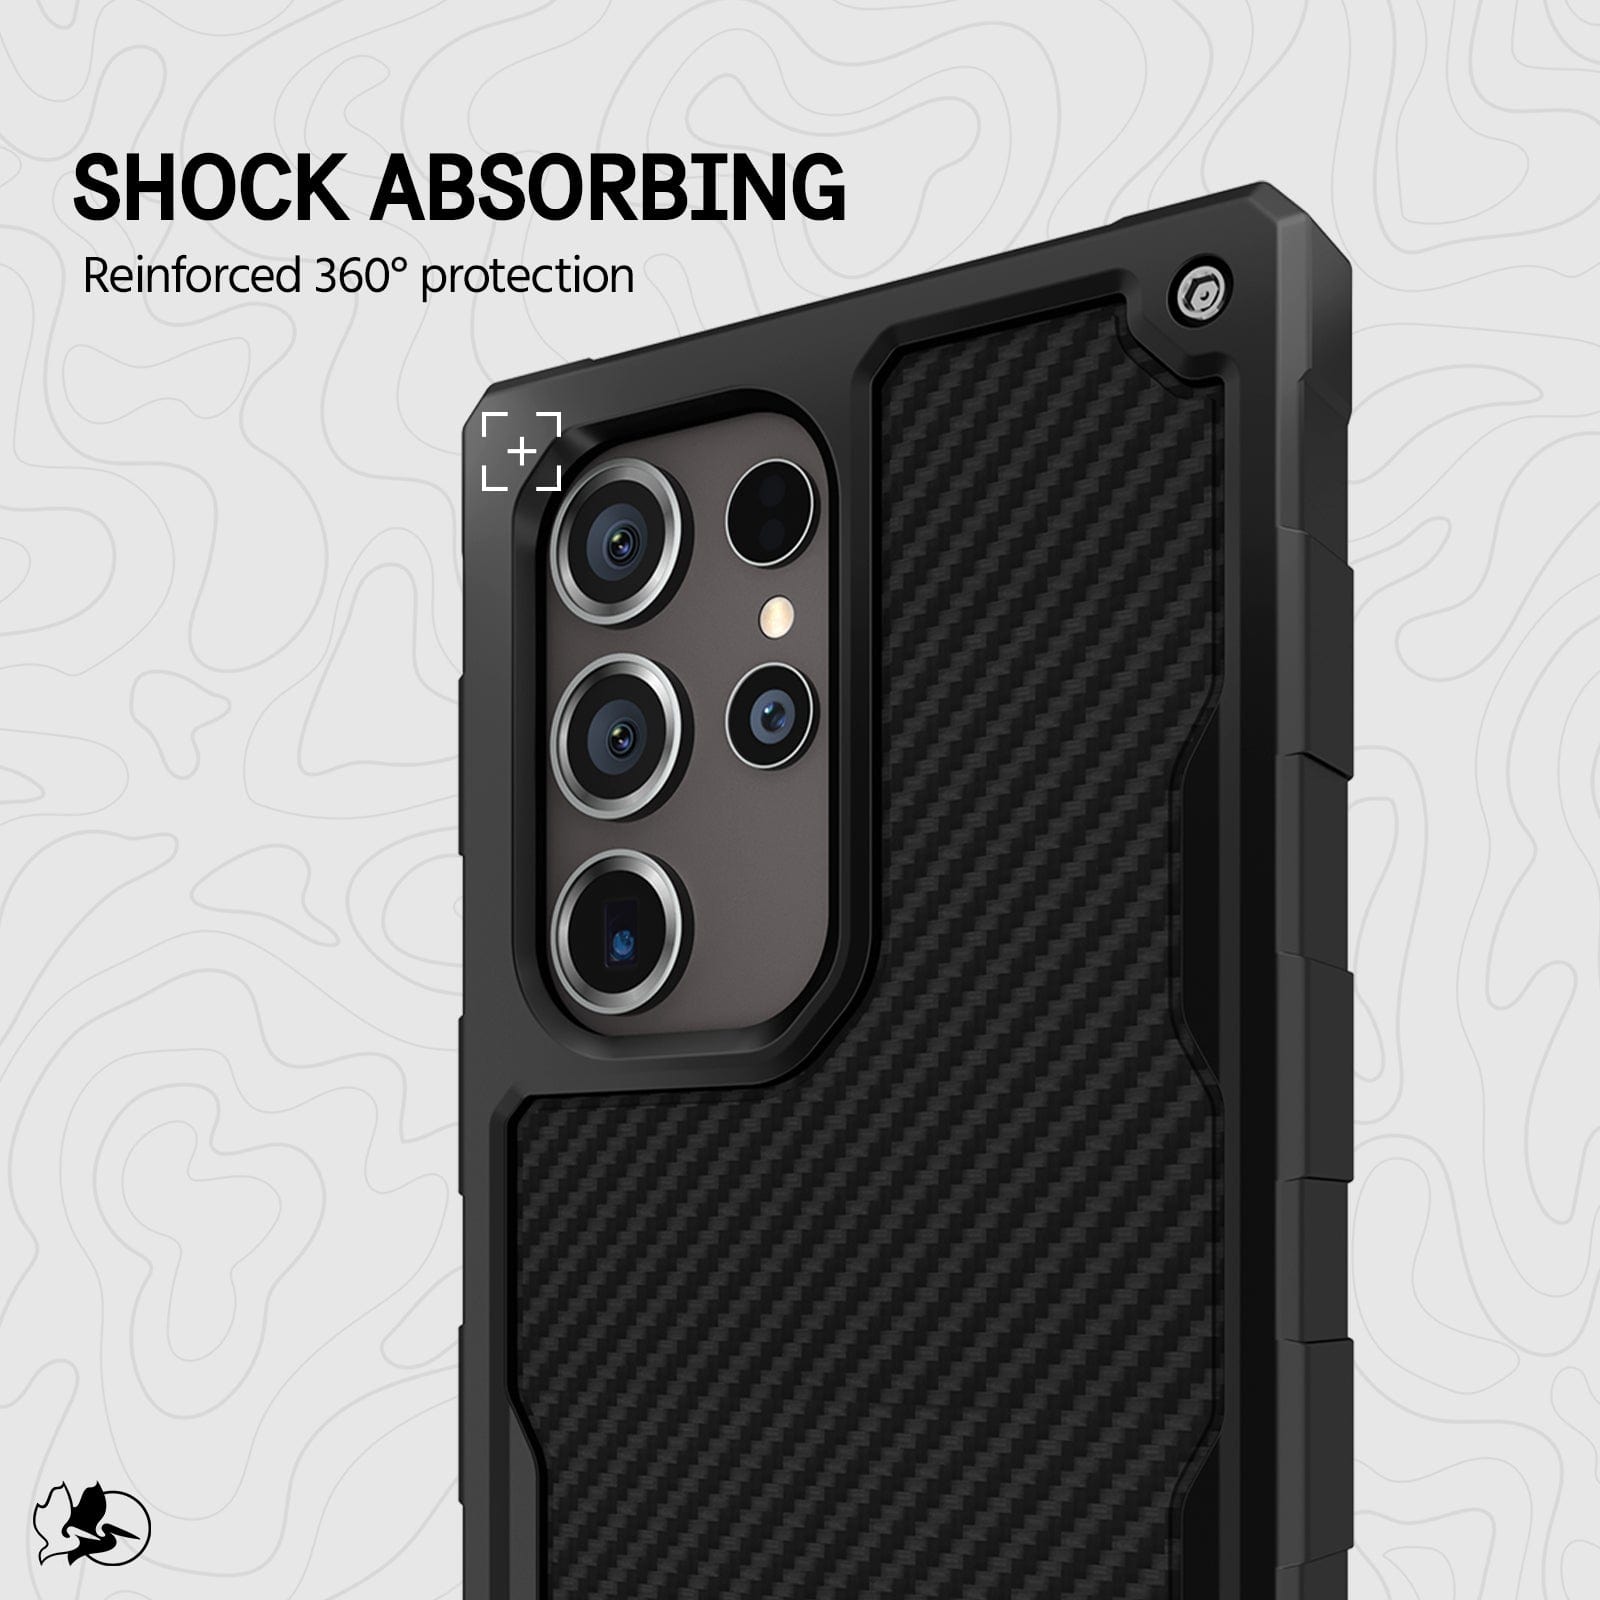 SHOCK ABSORBING REINFORCED 360 DEGREE PROTECTION